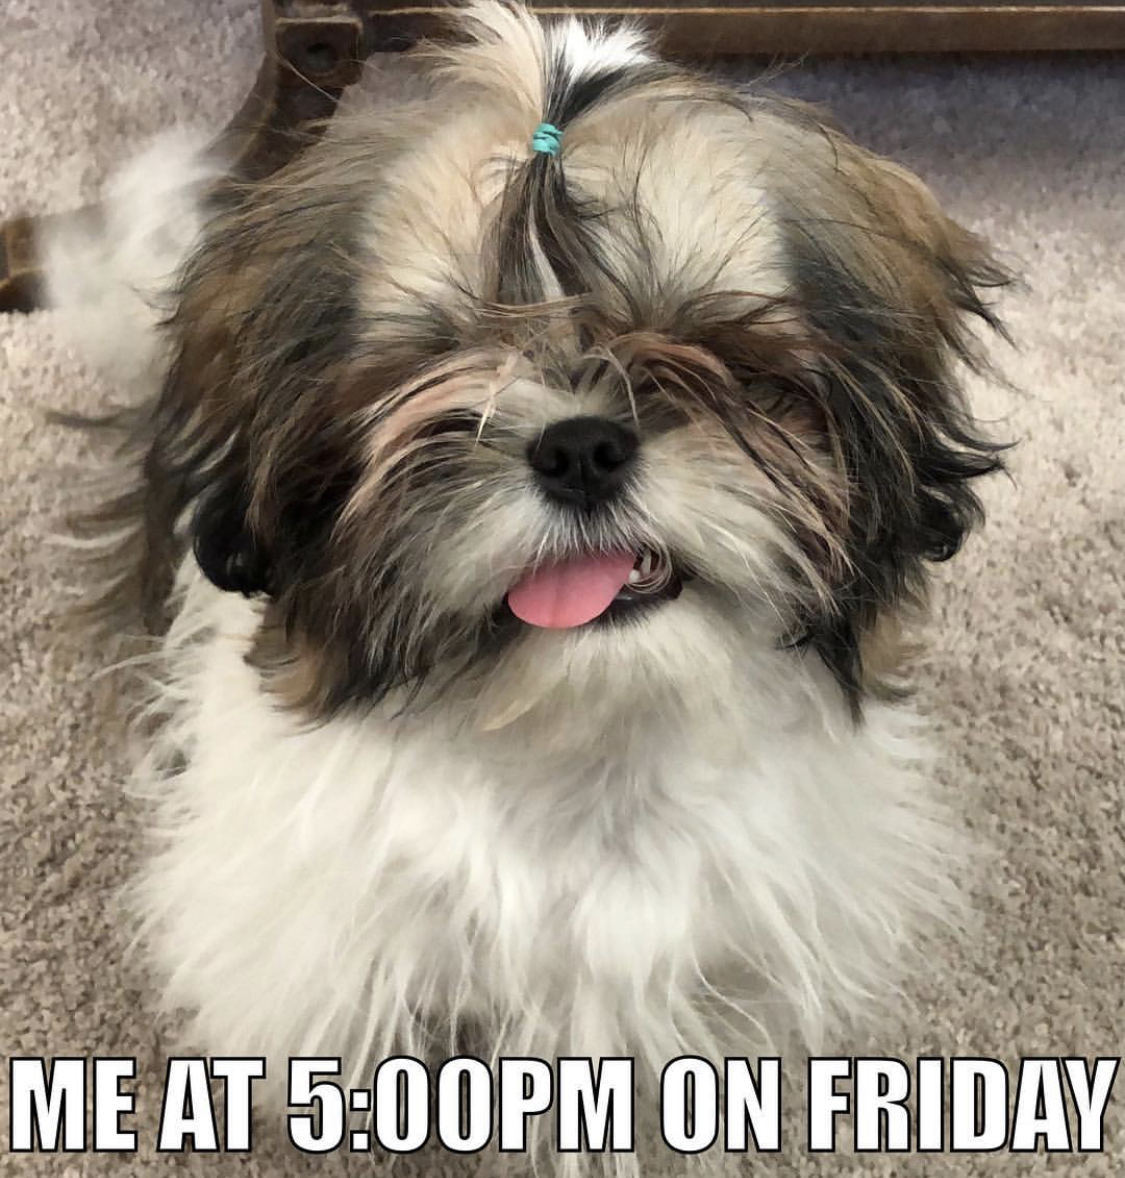 shaggy Shih Tzu with its tongue sticking out photo with a text 